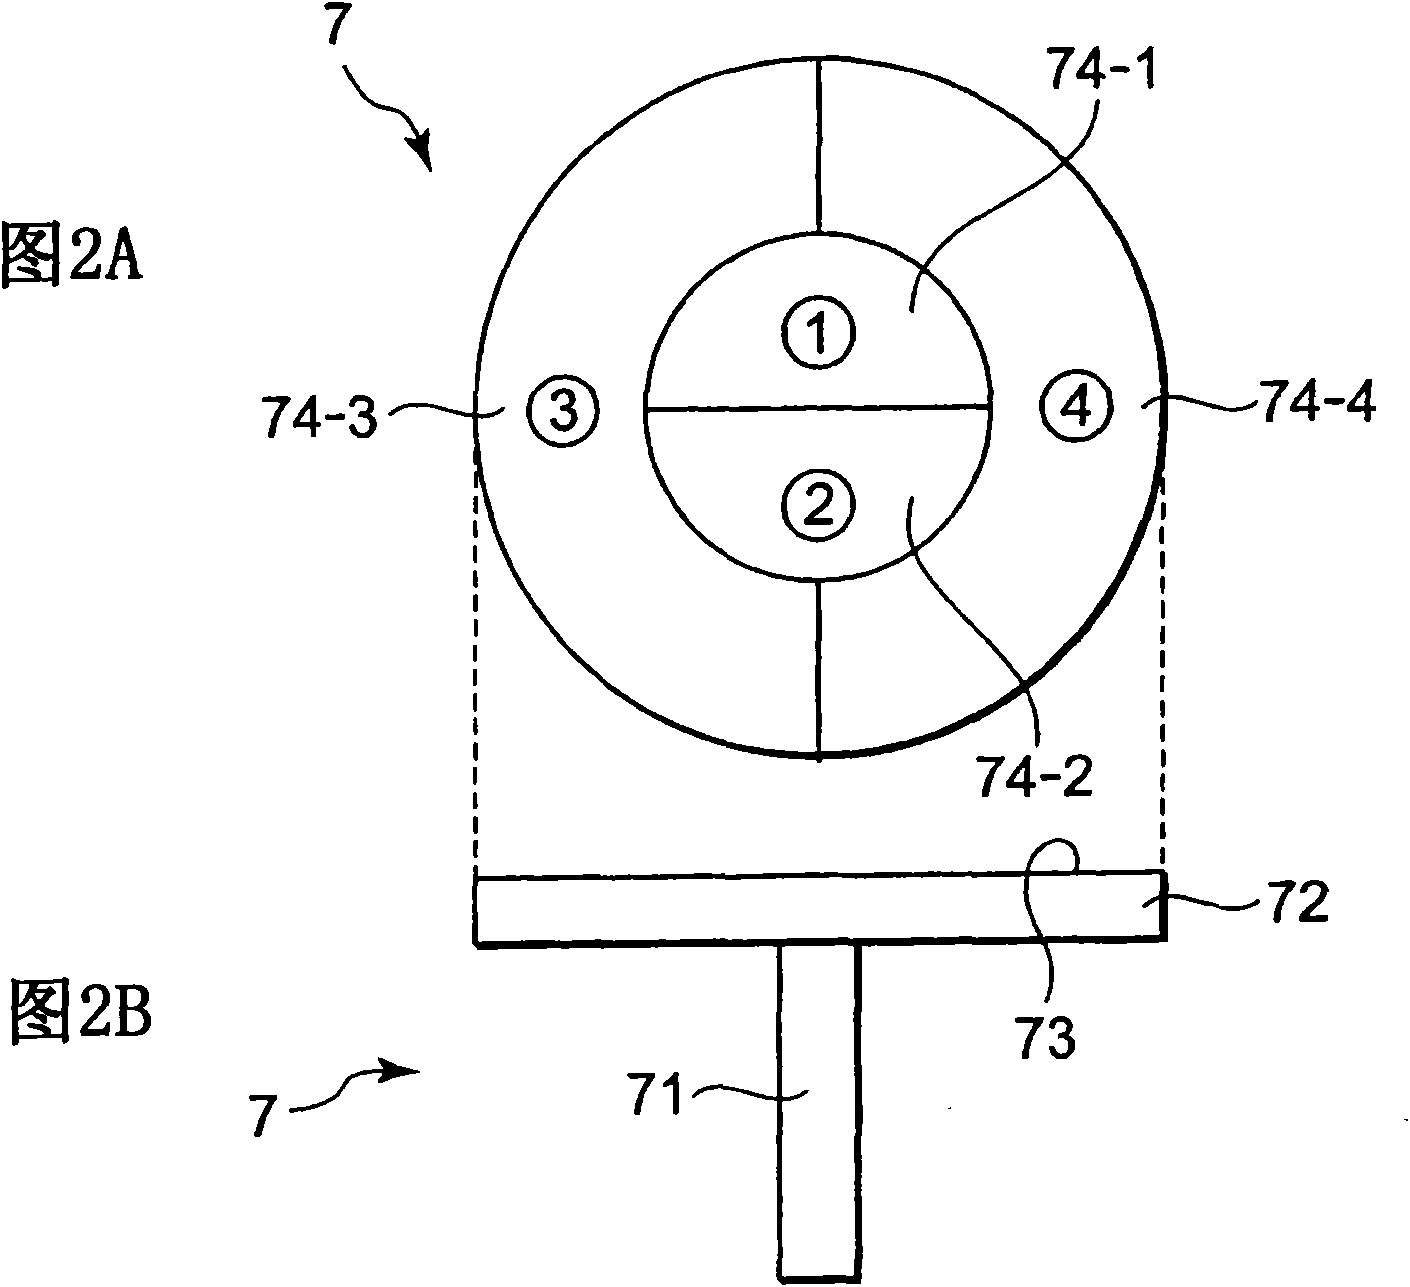 Manufacturing apparatus for semiconductor device, controlling method for manufacturing apparatus, and storage medium storing control program for manufacturing apparatus